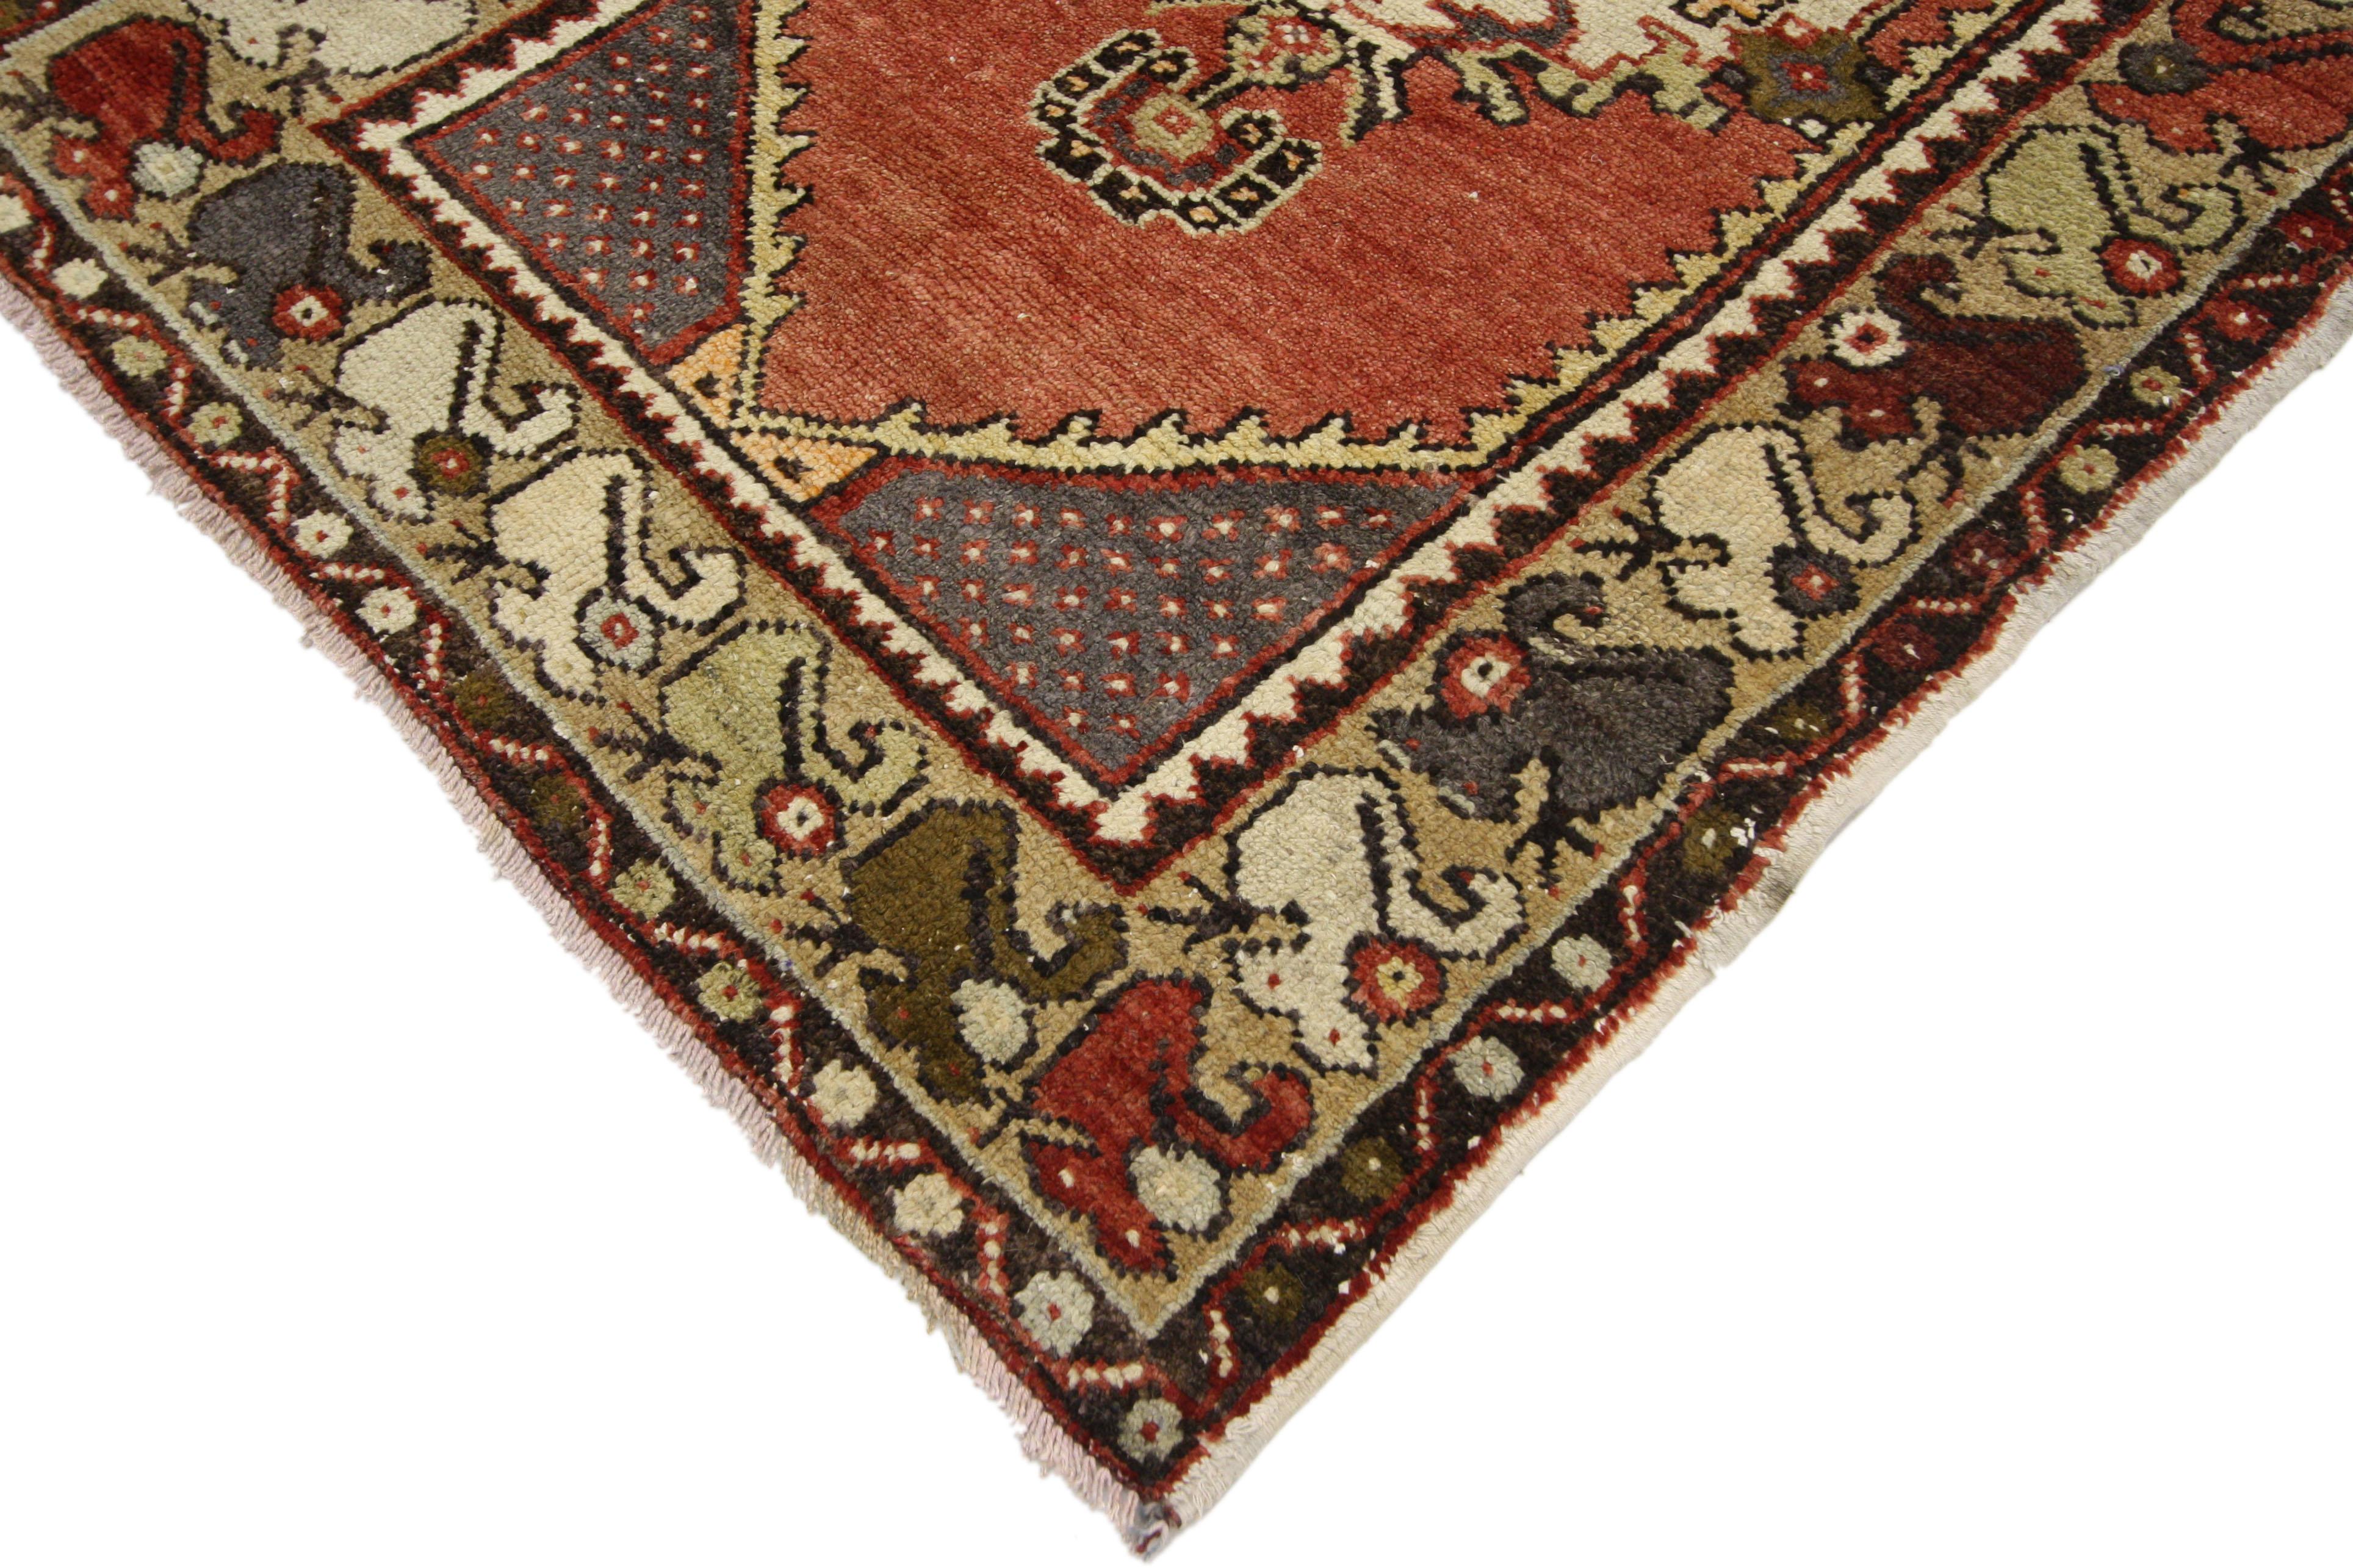 52408 Vintage Turkish Oushak Runner with Jacobean Style, Hallway Runner 02'10 x 09'07. This hand-knotted wool vintage Turkish Oushak runner features four connected floral medallions with floral pendants across an abrashed red field. Hooked spandrels